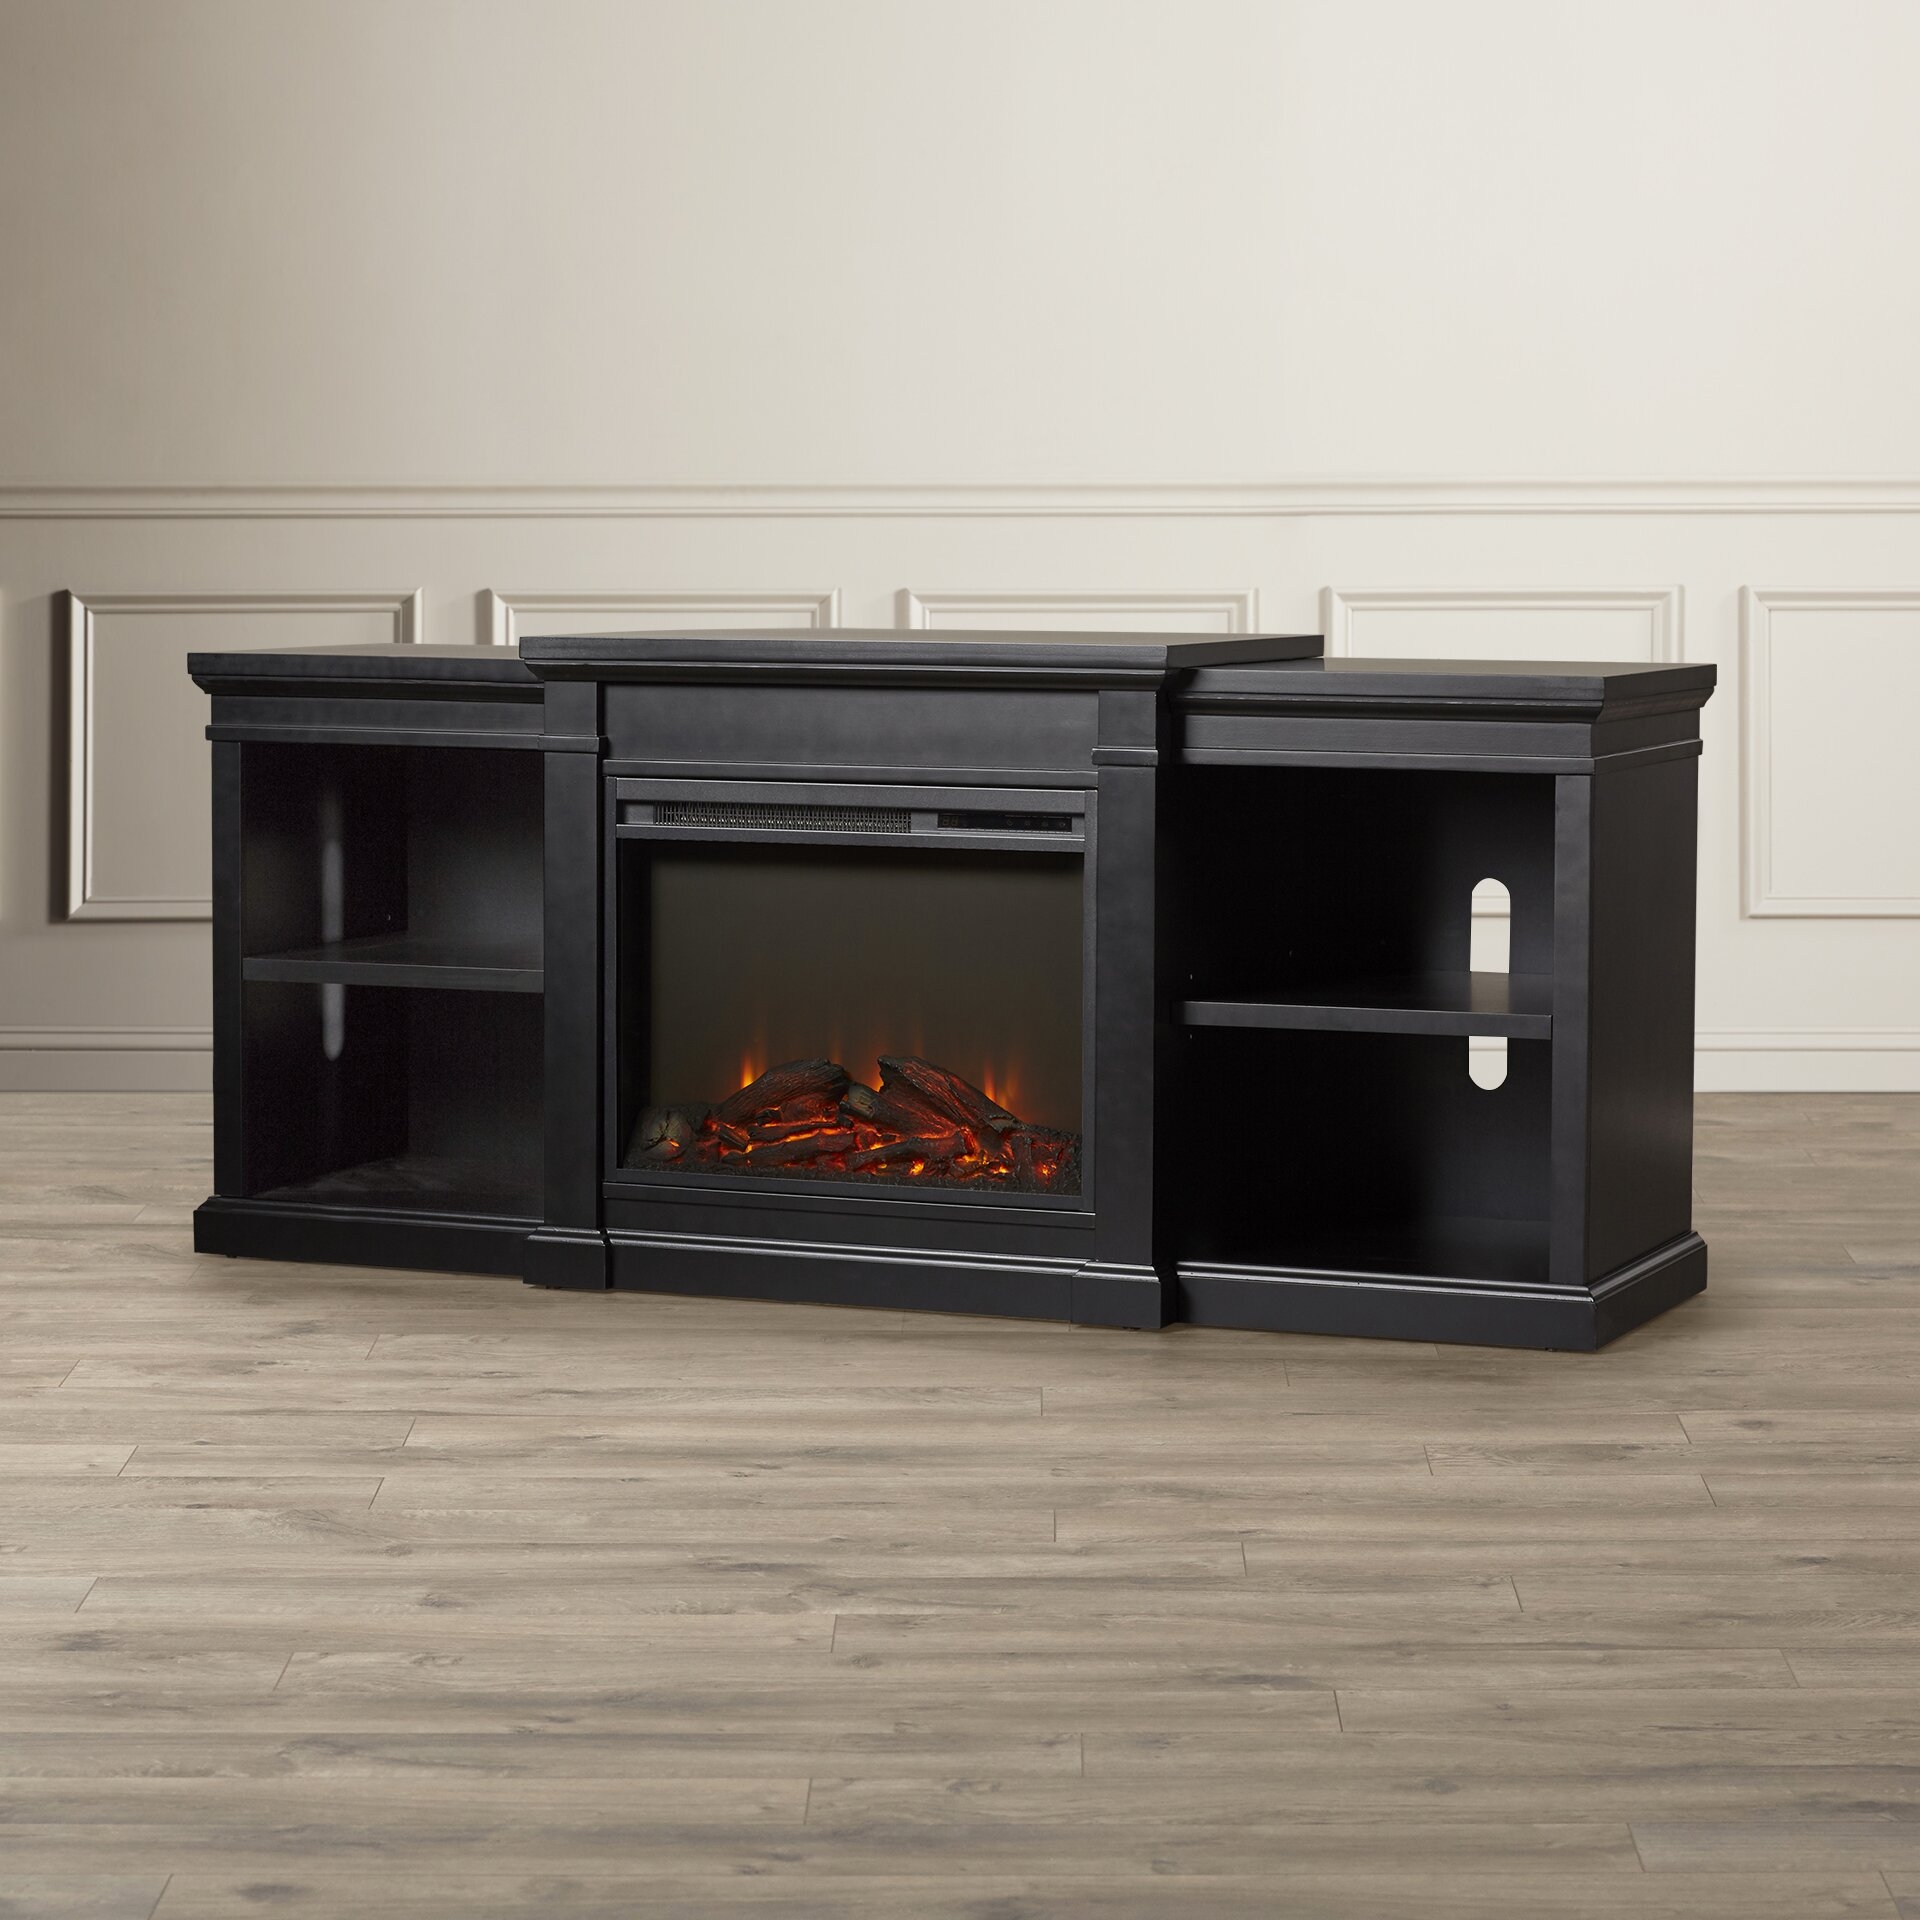 Stowe TV Stand for TVs up to 70" with Fireplace Included